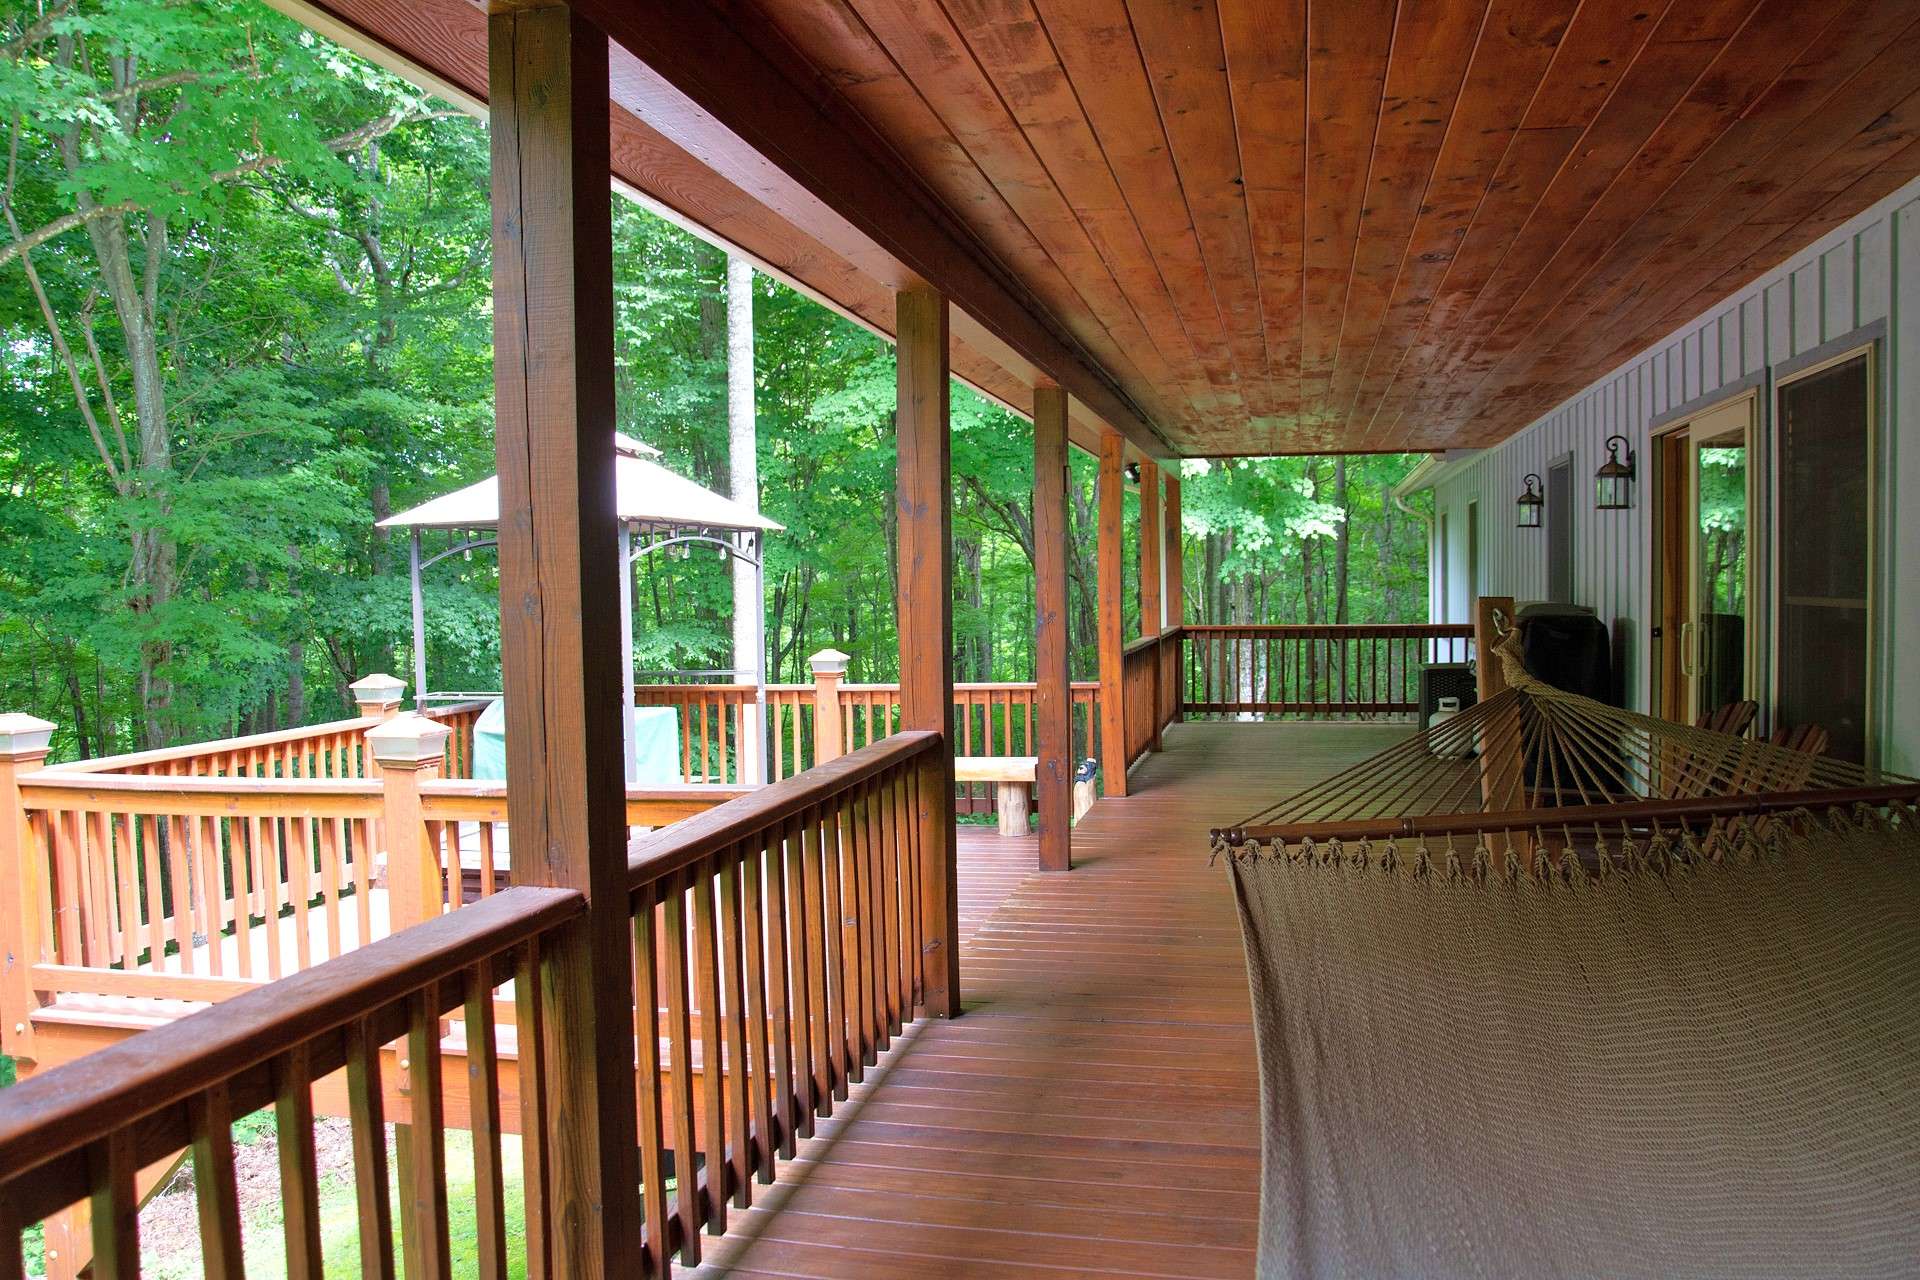 Relax and enjoy the peaceful surroundings on the back deck which has been expanded to offer both covered and open areas adding to the outdoor grilling, dining, and entertaining options.